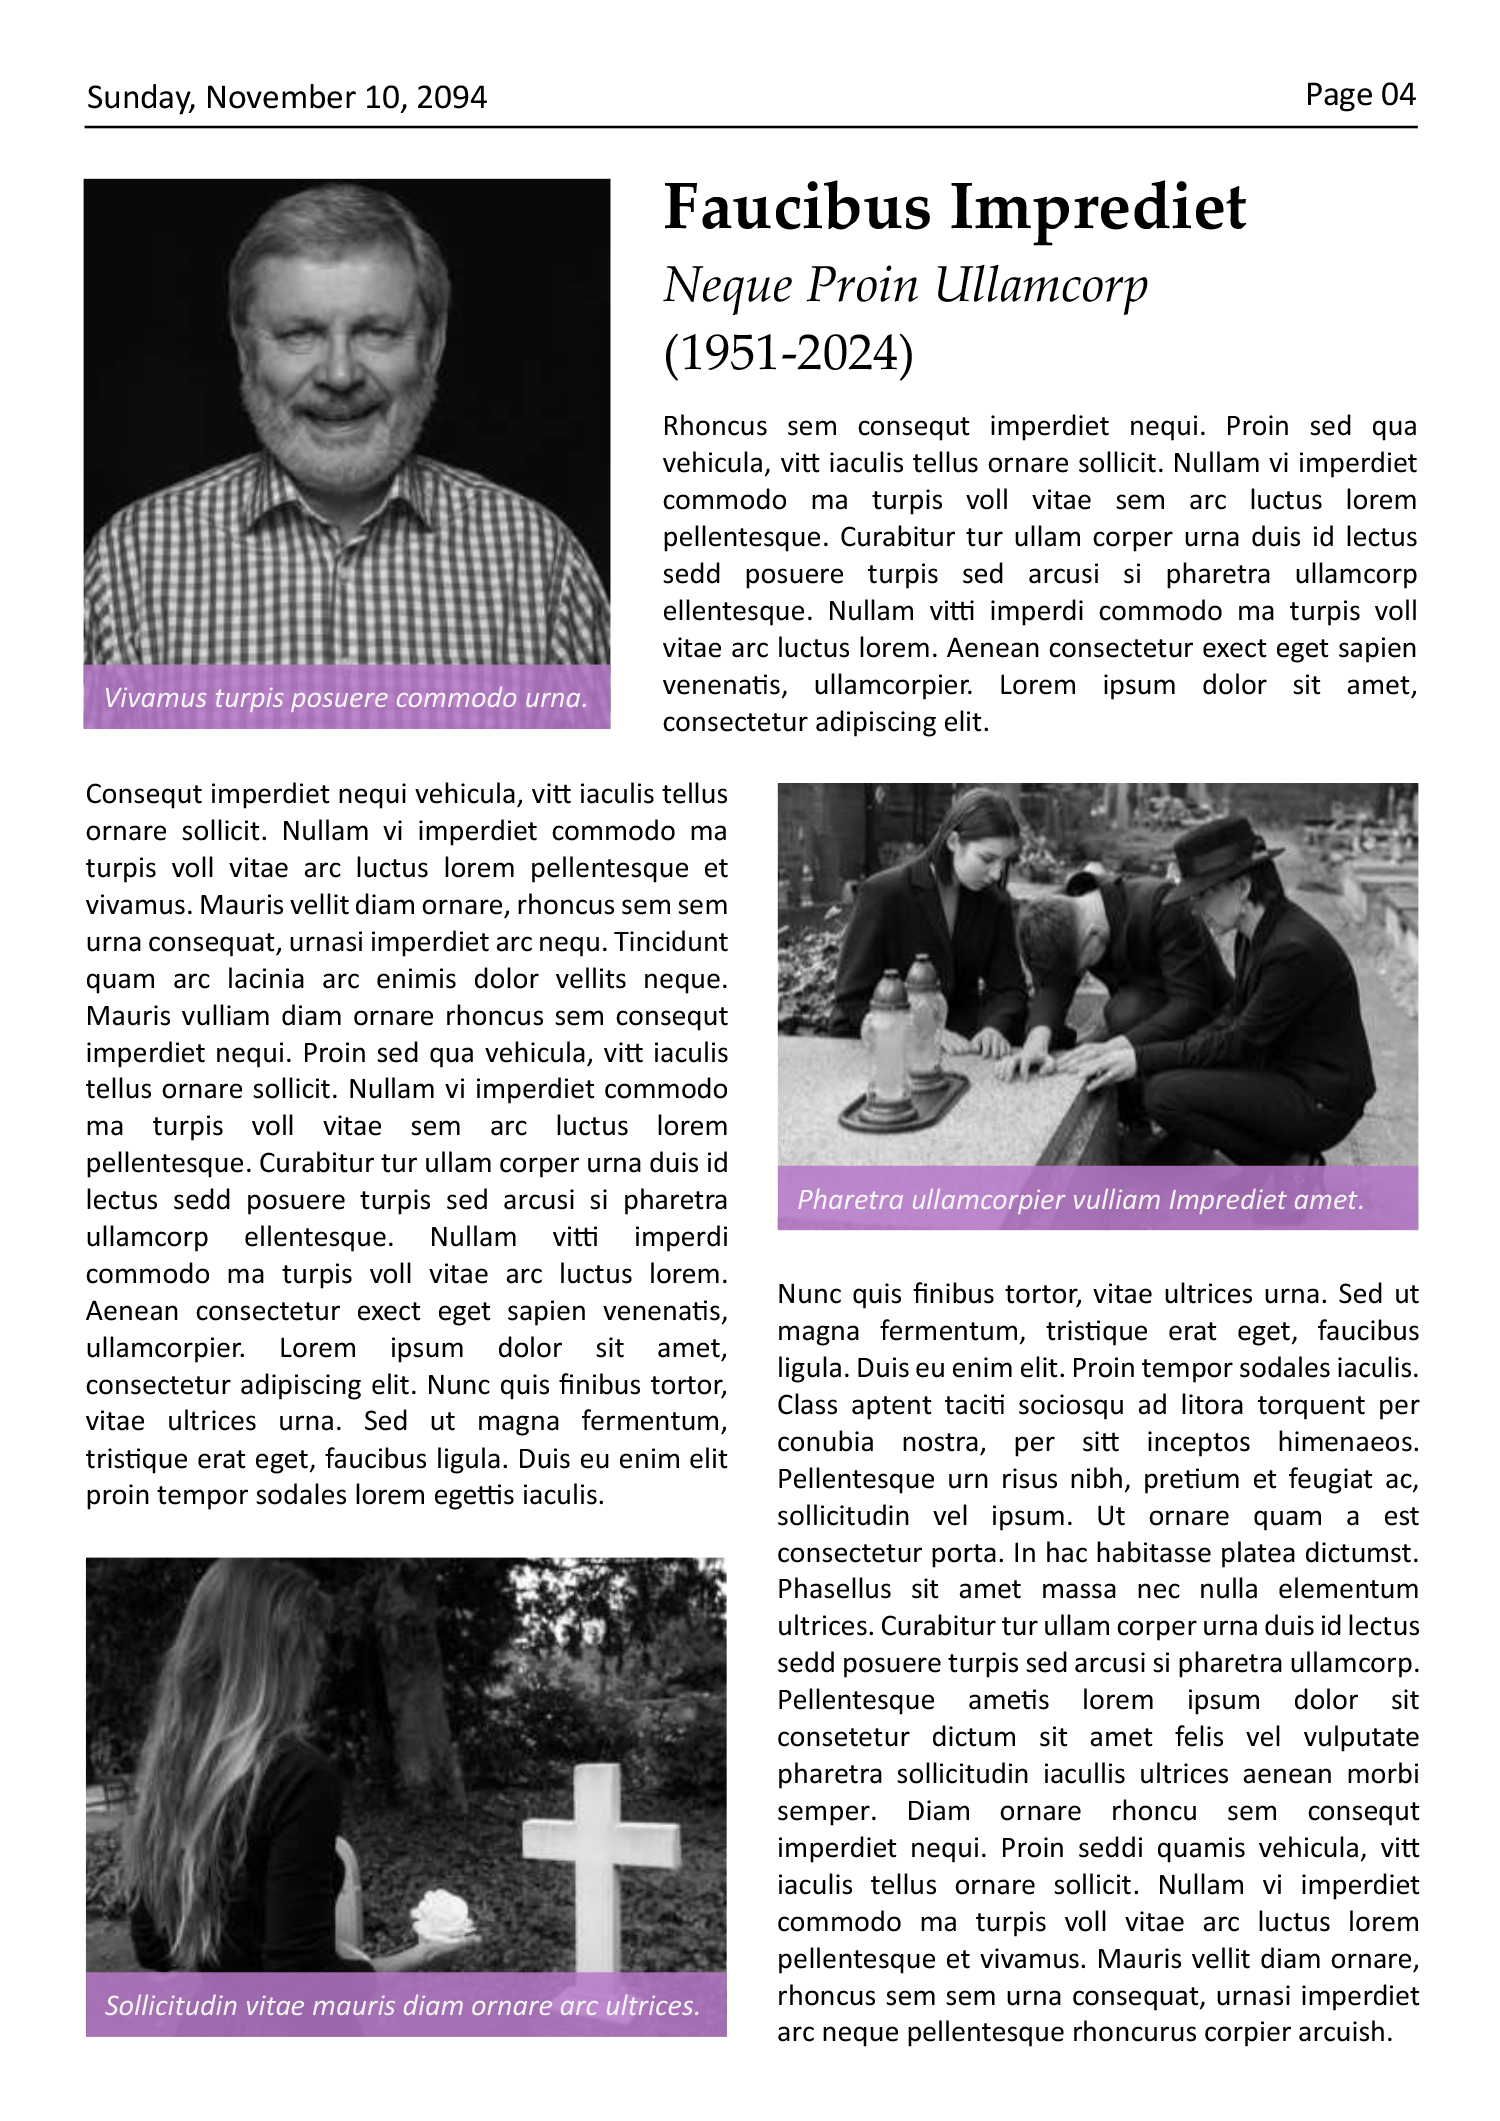 Classic A4 Newspaper Obituary Page Template - Page 04